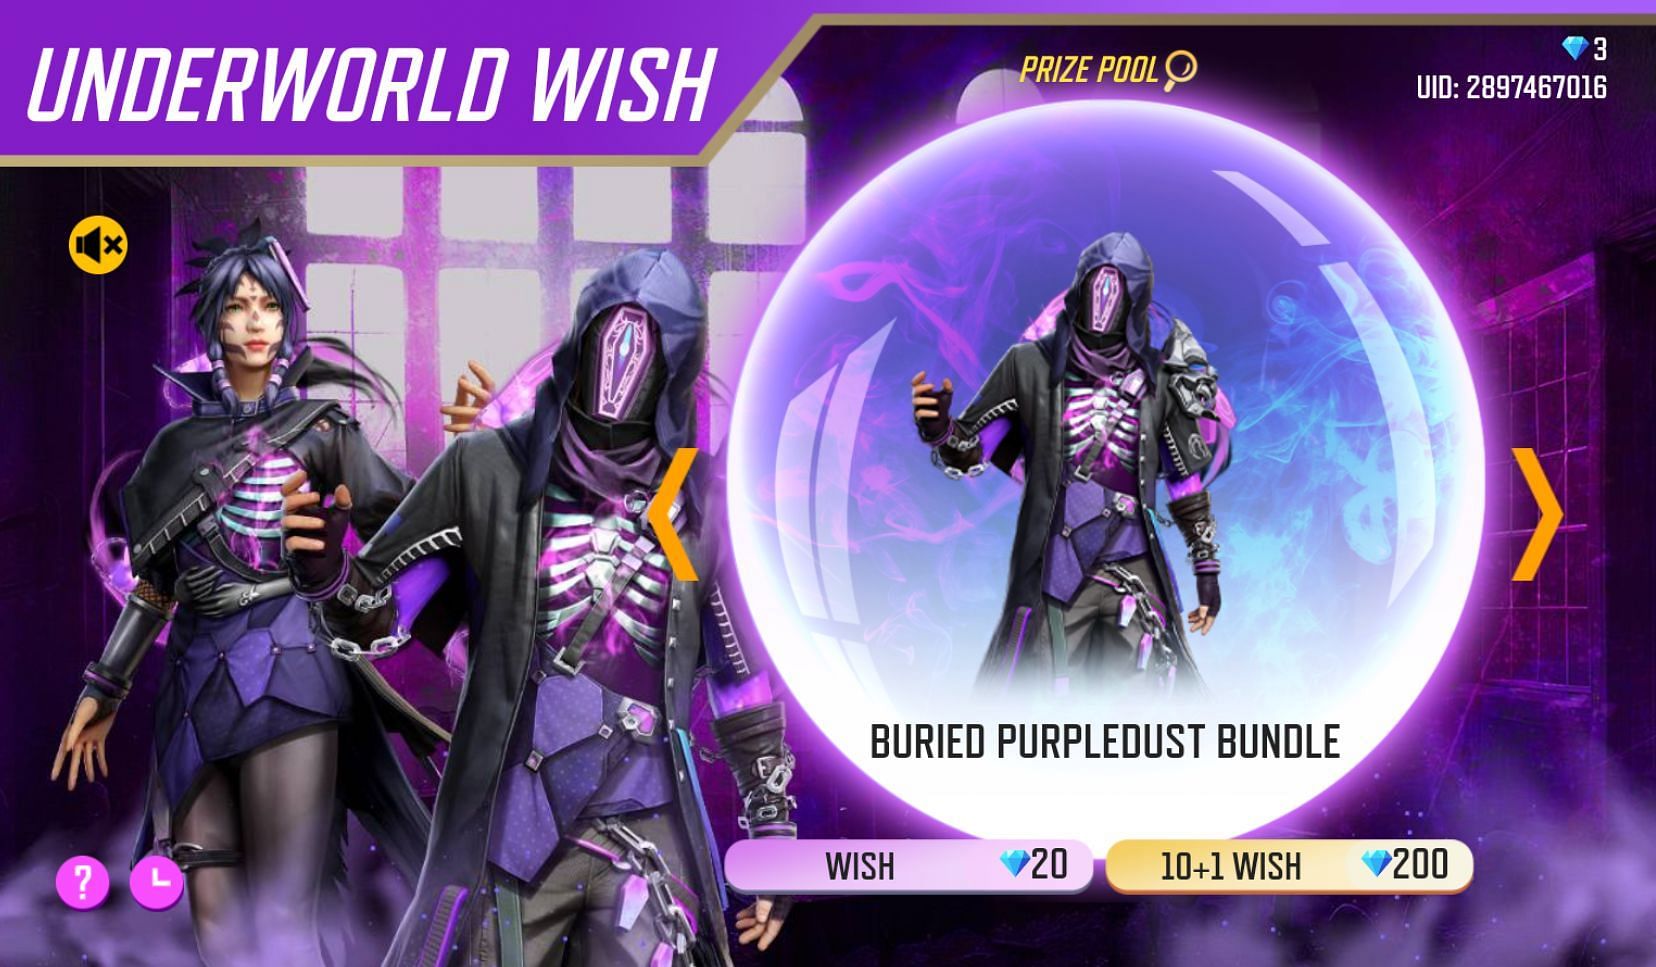 A step-by-step guide to obtaining rare items from the Underworld Wish event in FF / FF MAX (Image via Garena)